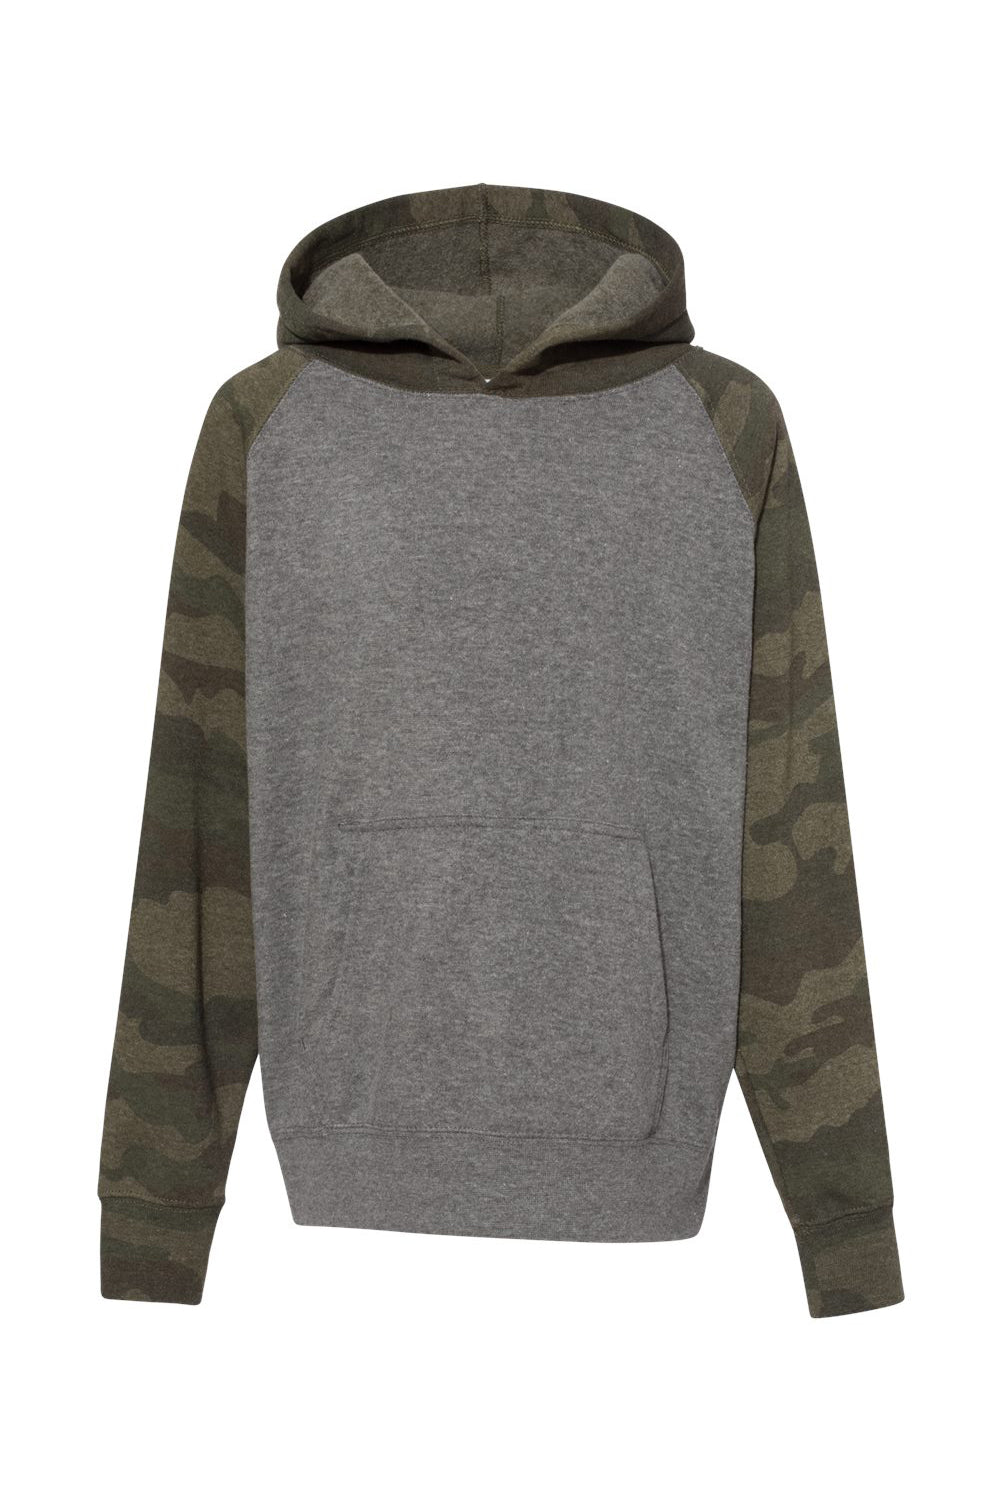 Independent Trading Co. PRM15YSB Youth Special Blend Raglan Hooded Sweatshirt Hoodie Heather Nickel Grey/Forest Green Camo Flat Front